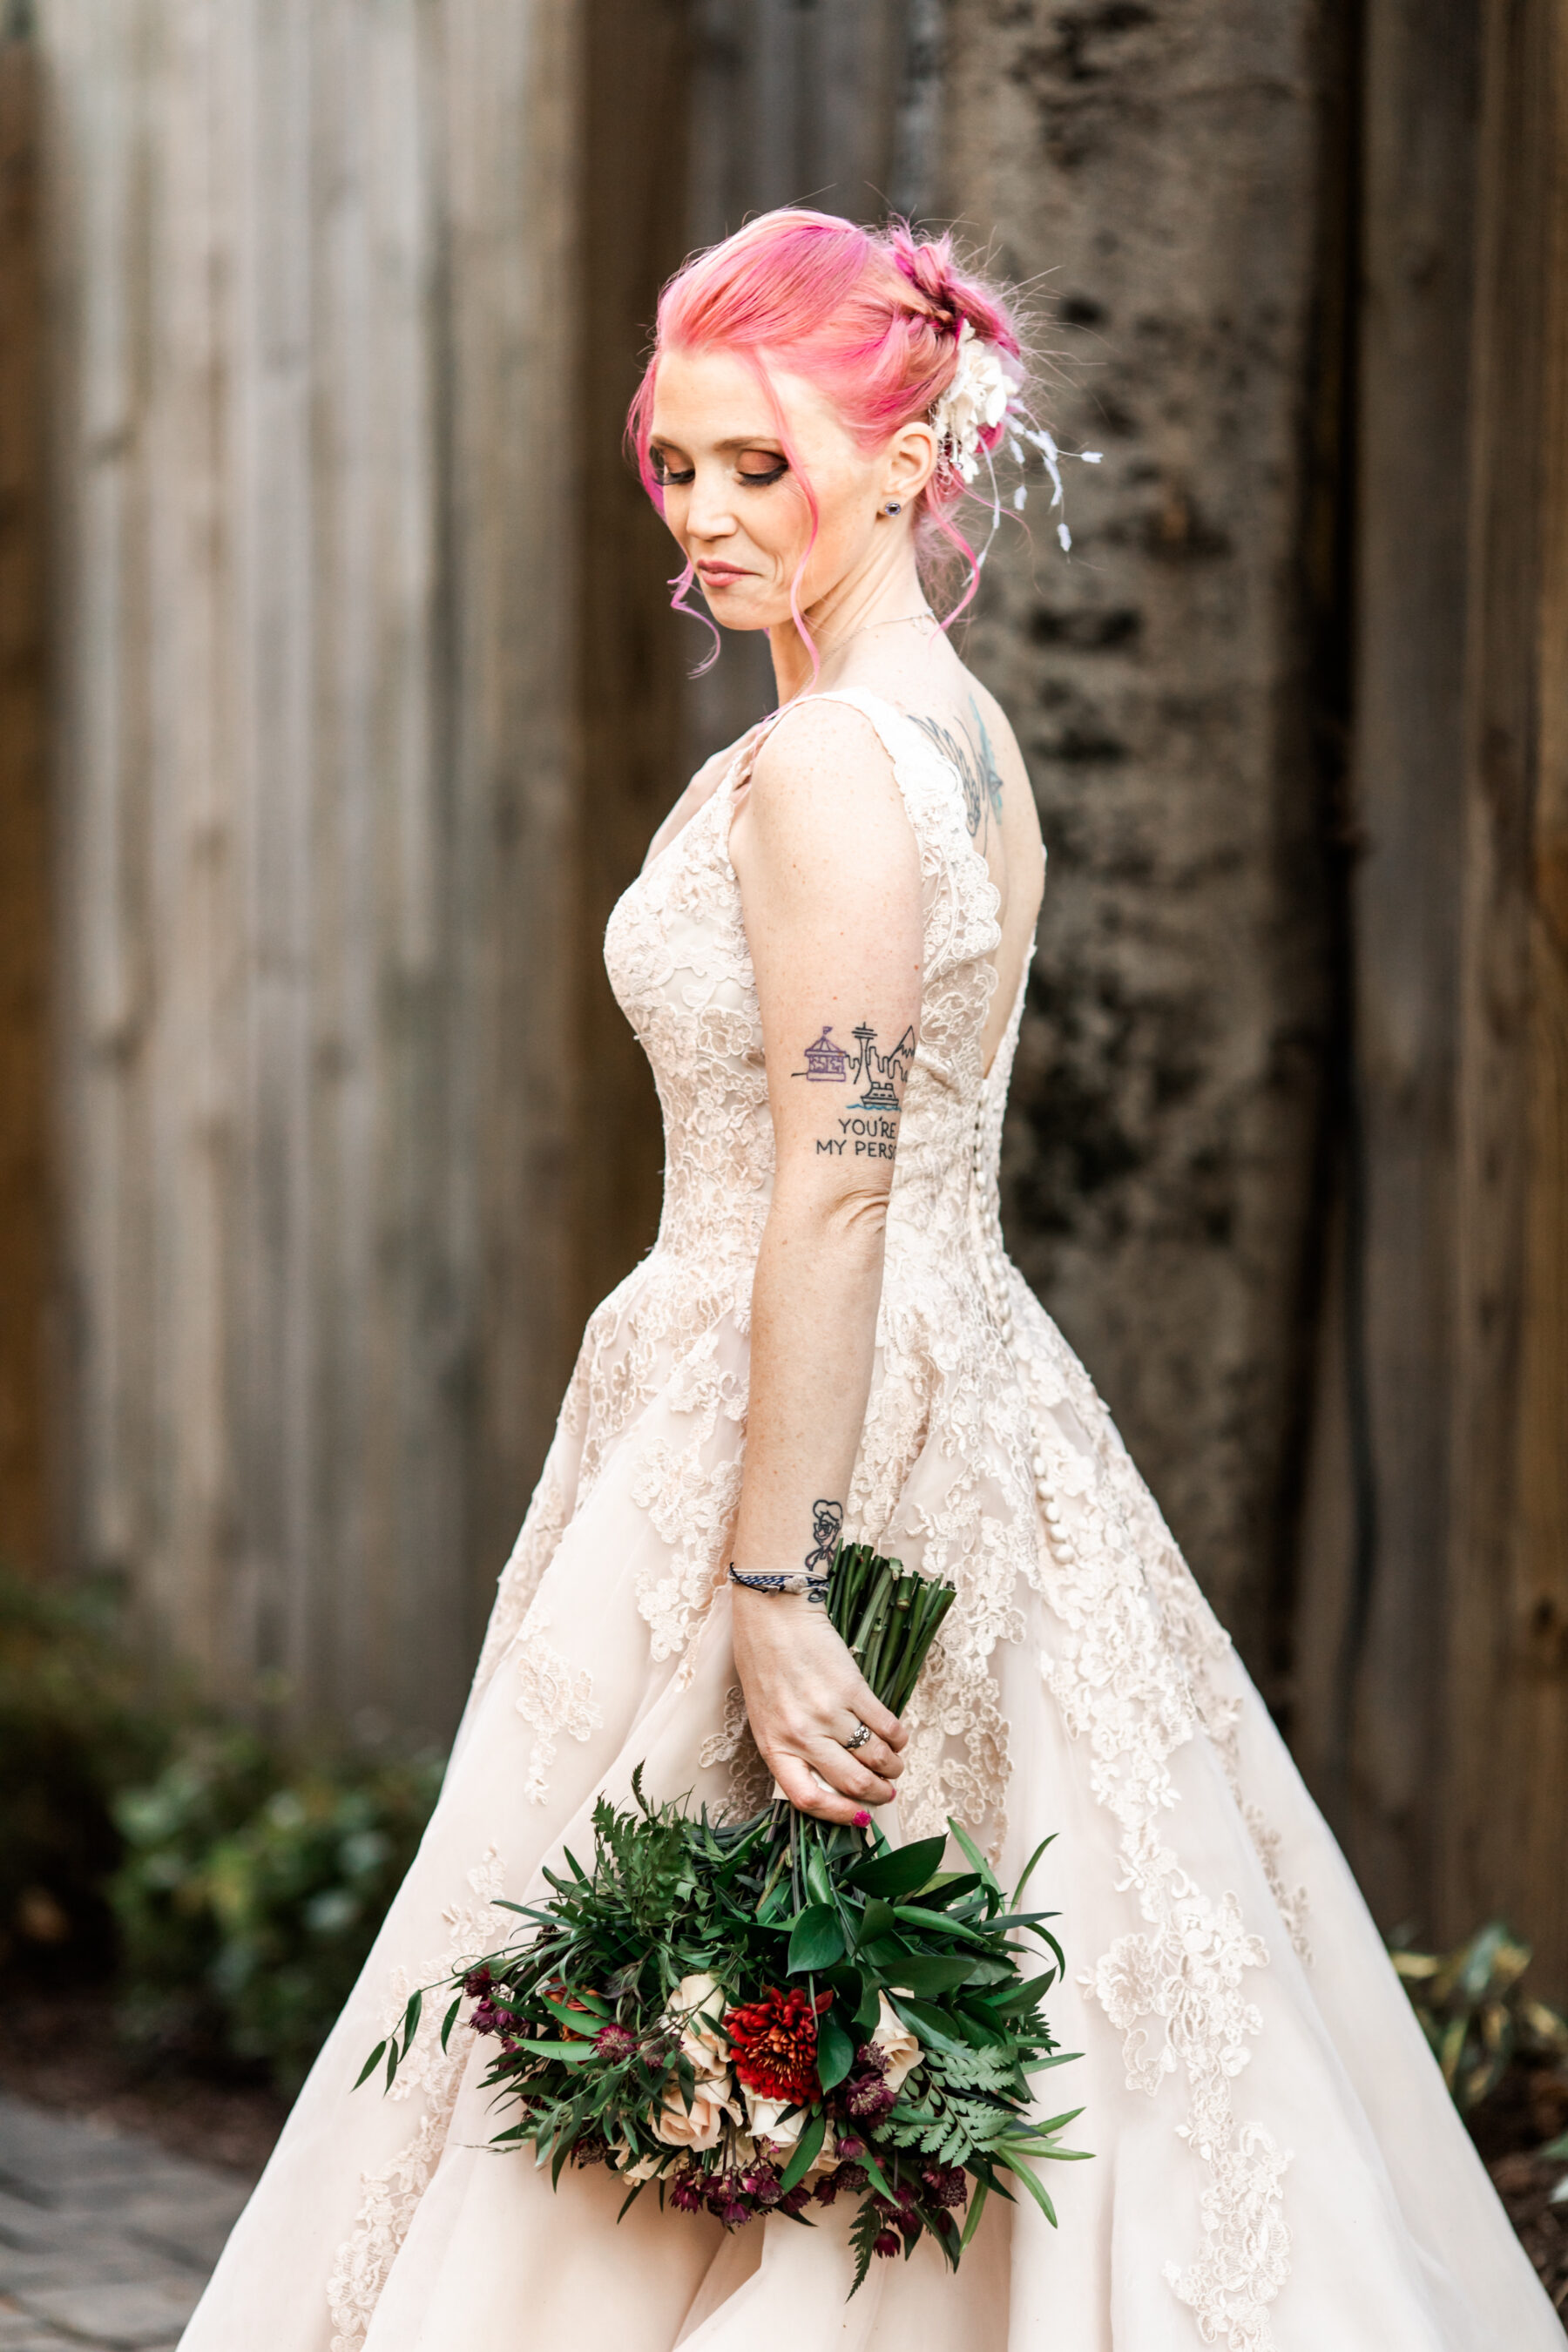 Nashville Wish Upon a Wedding captured by Nyk + Cali Photography featured on Nashville Bride Guide